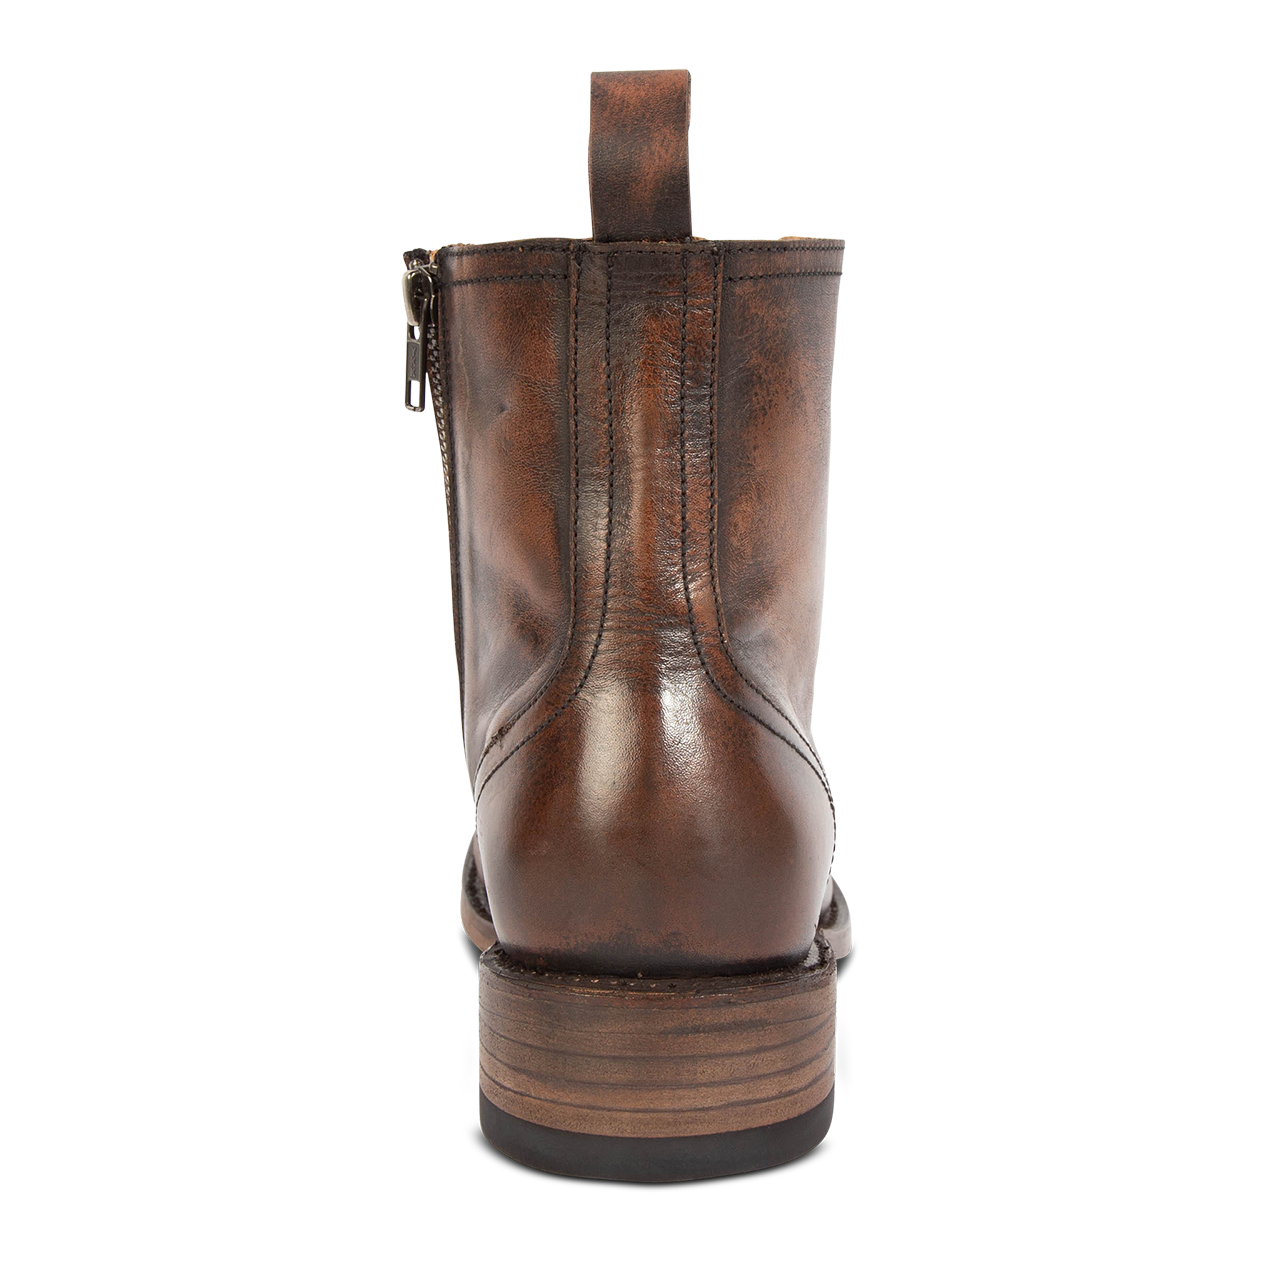 Back view showing leather rear pull tab, low block heel and stitch detailing on FREEBIRD men's Bodie black distressed leather boot